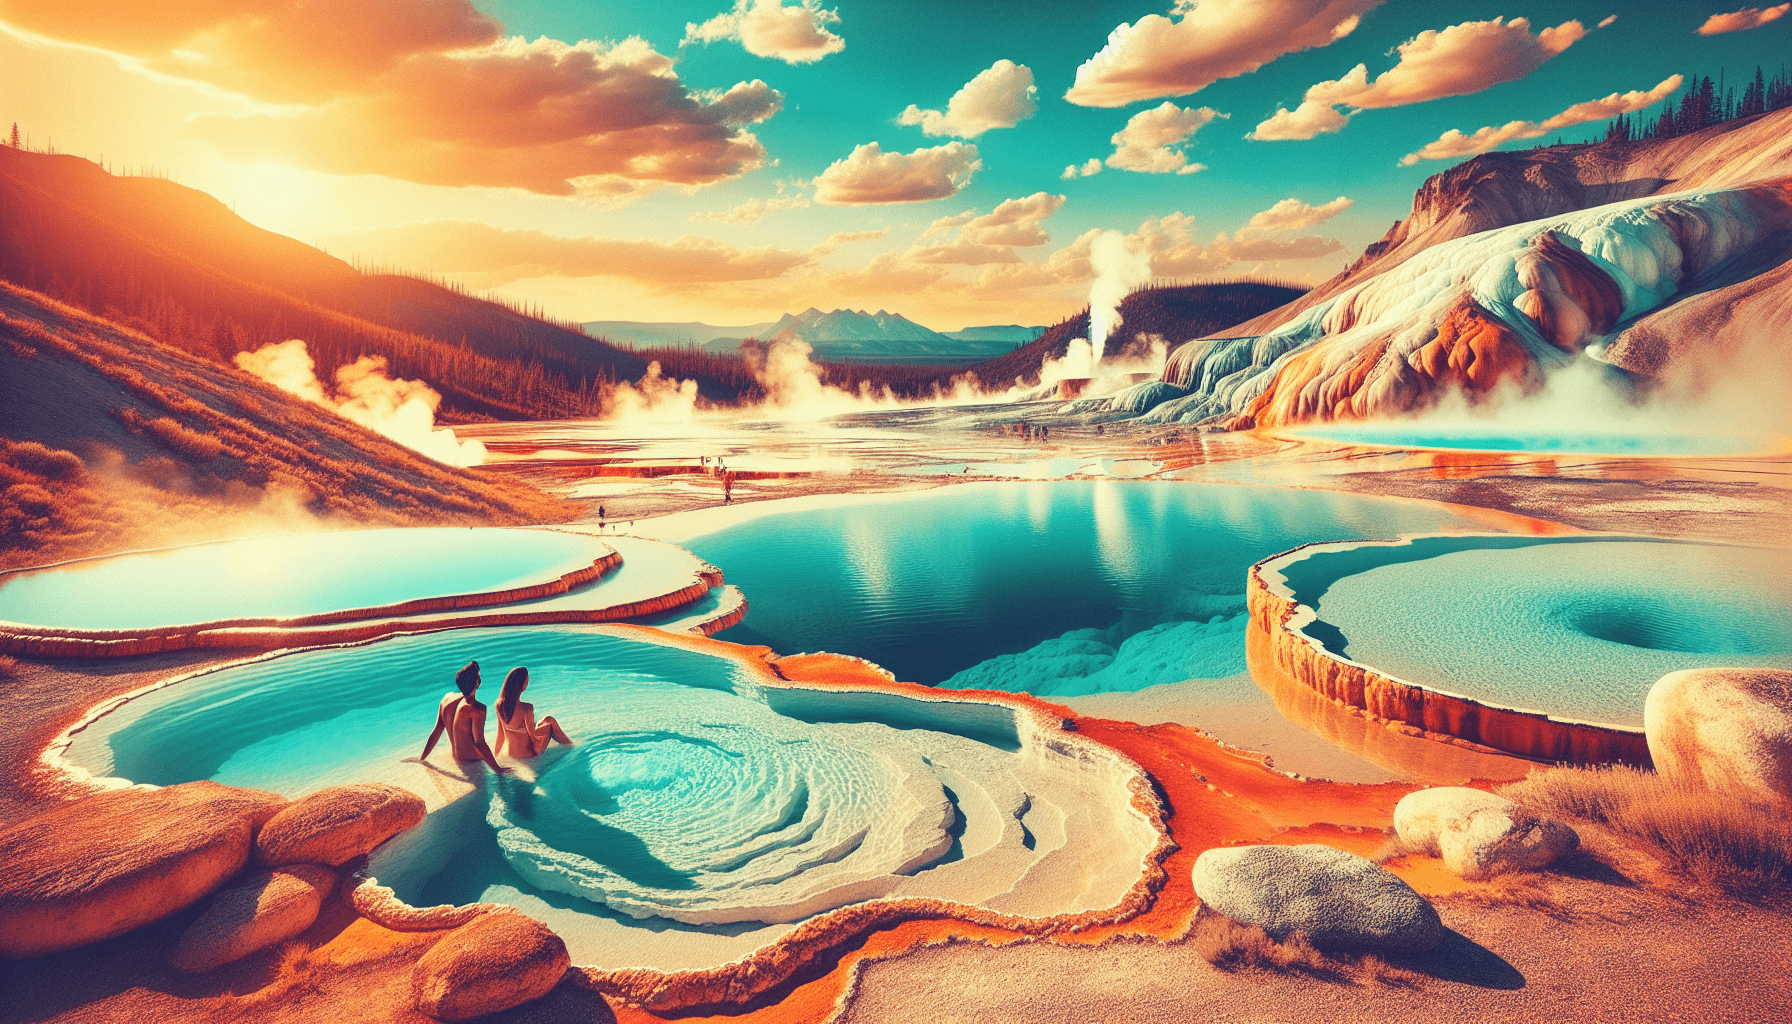 Where Can You Swim In Hot Springs In Us?